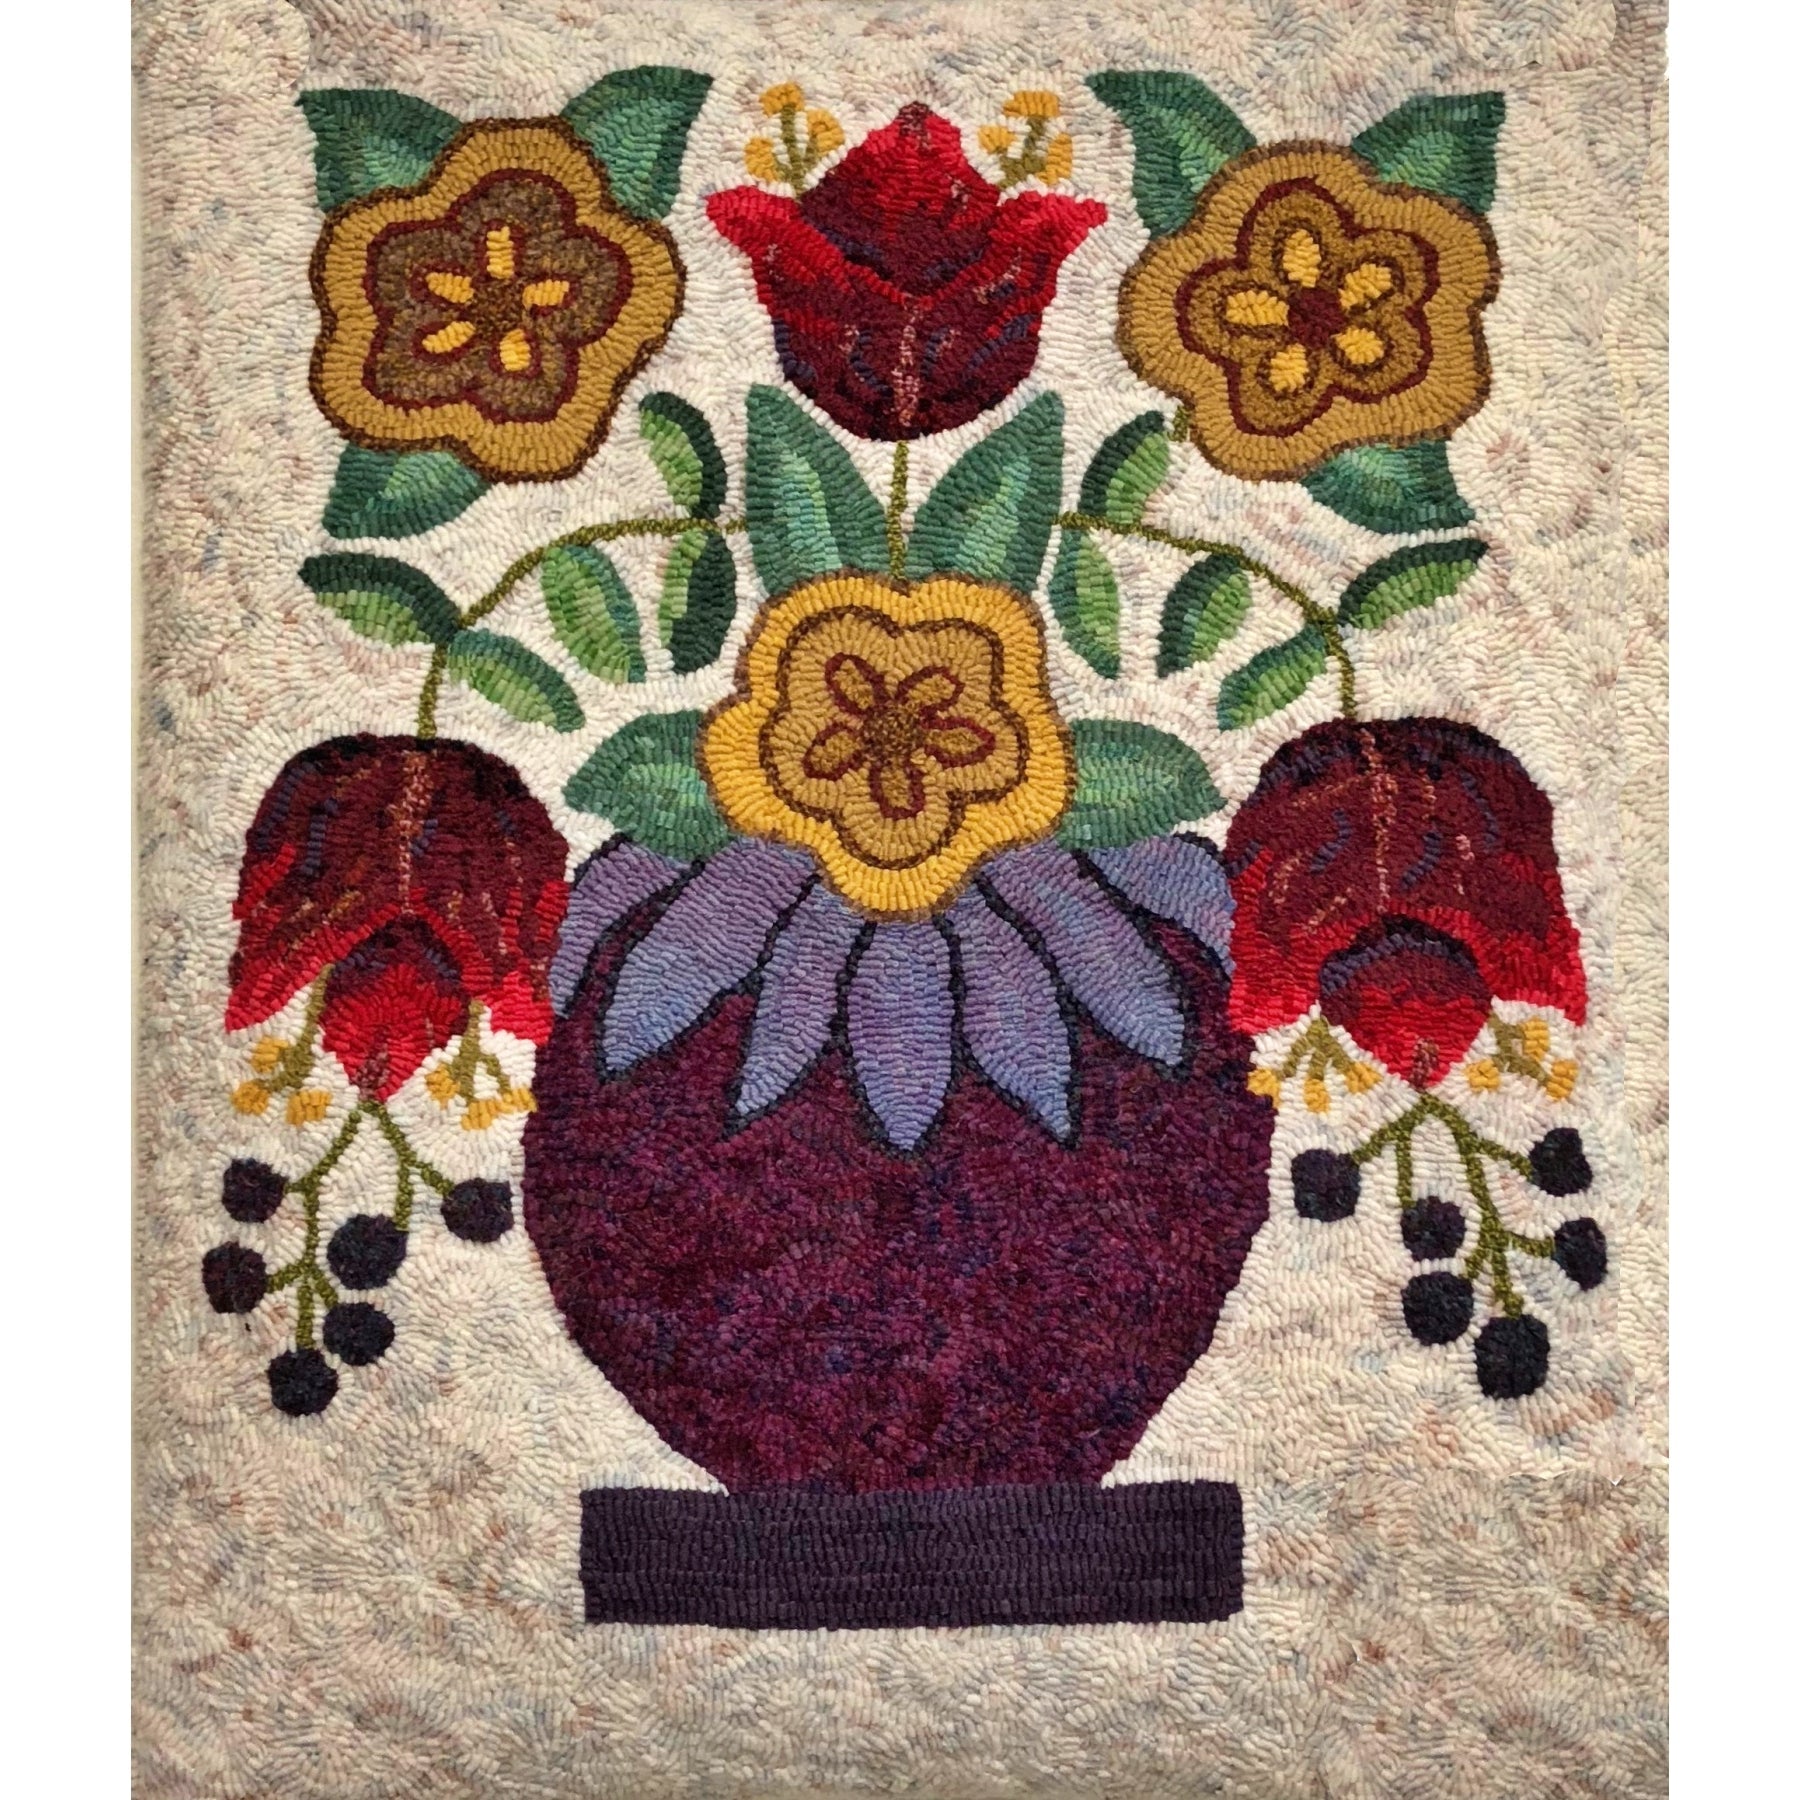 Attic Treasures, rug hooked by Ruth Downing